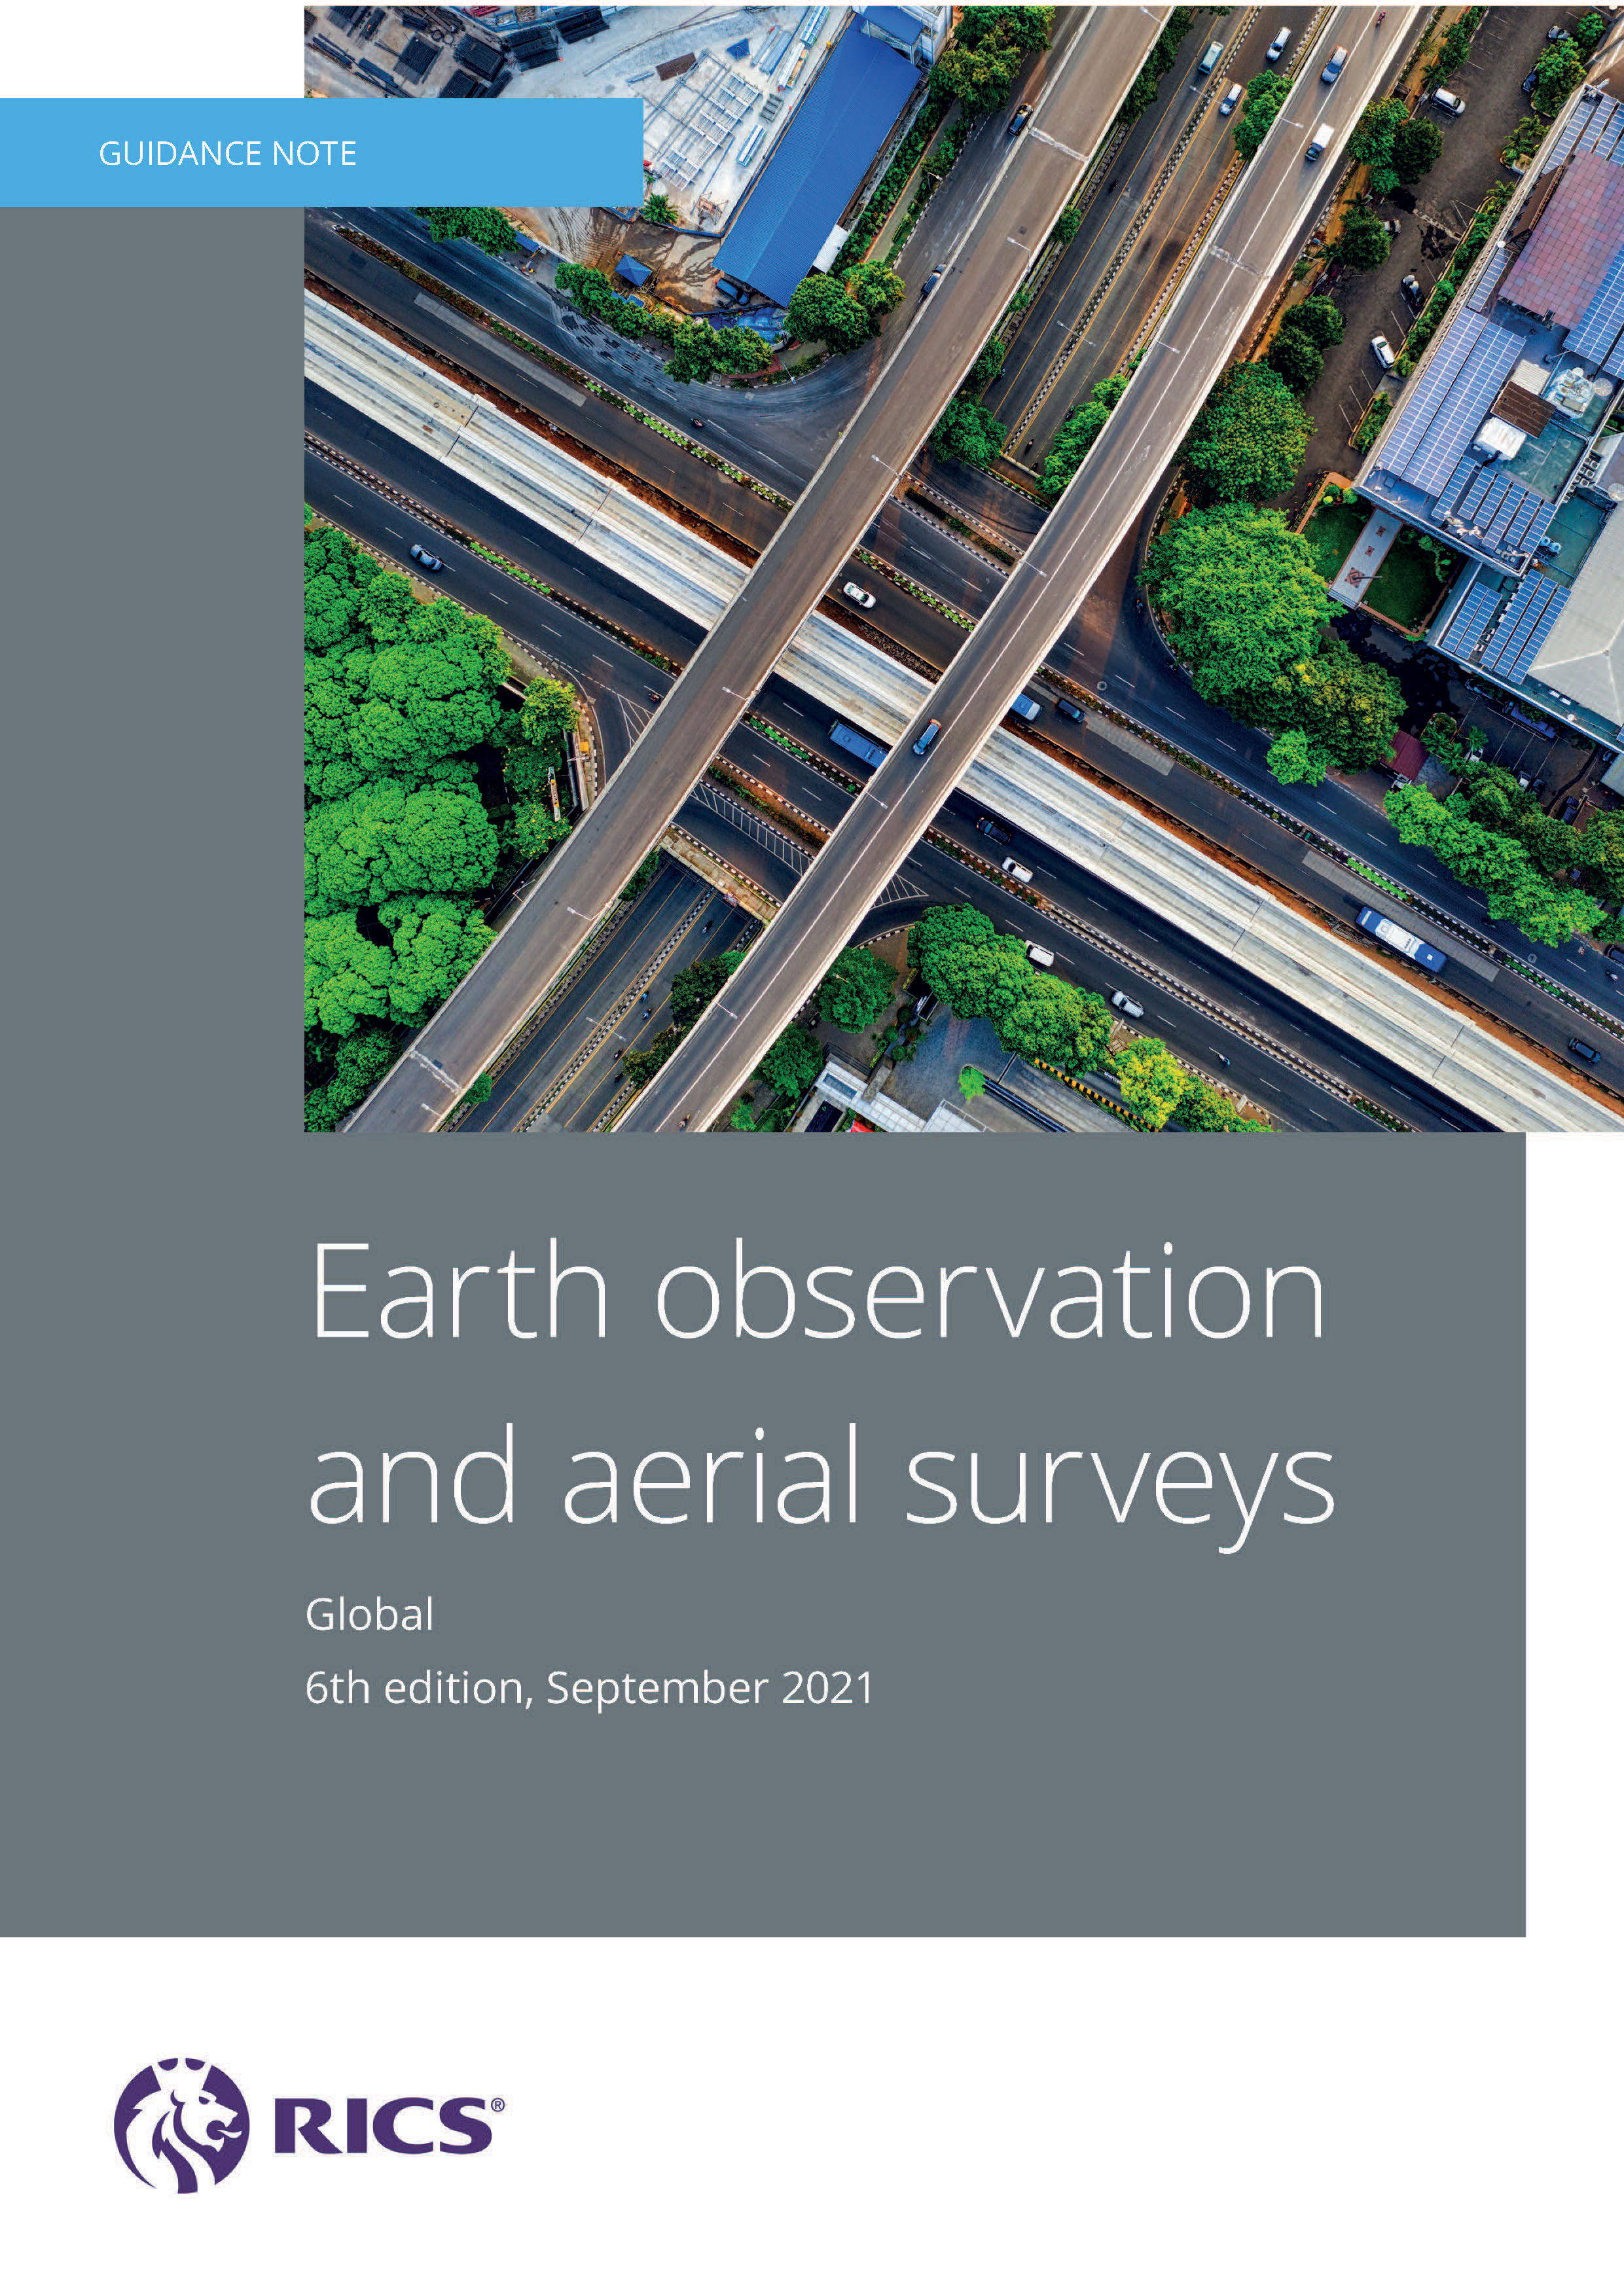 James-Pick_26-Nov_Cover-for-Earth-observation-and-aerial-surveys-global-guidance-note-6th-edn.jpg